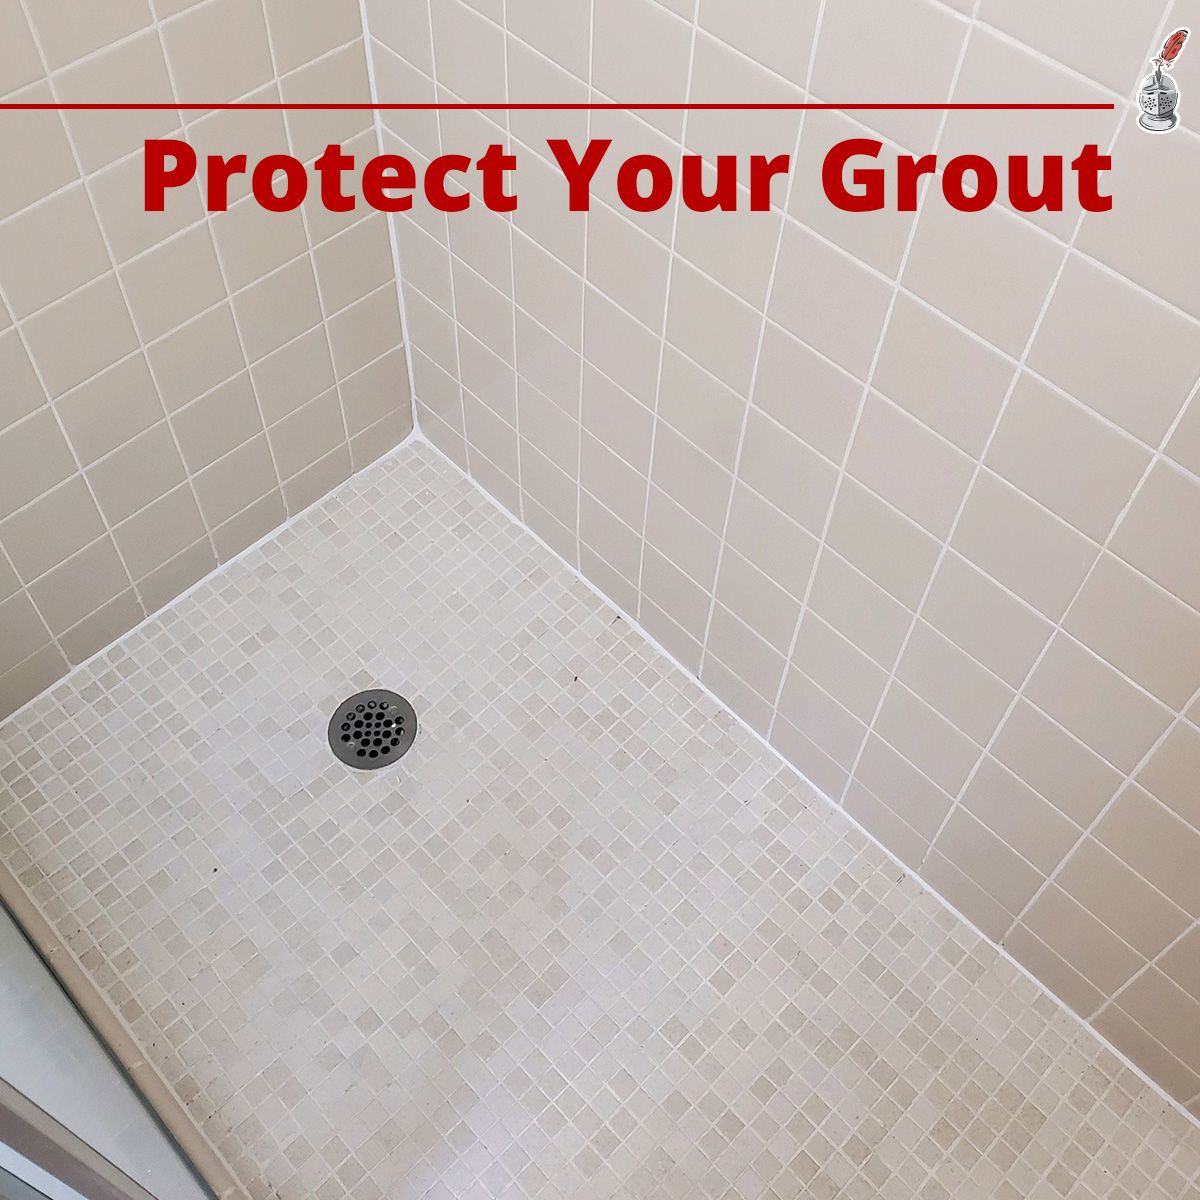 Protect Your Grout